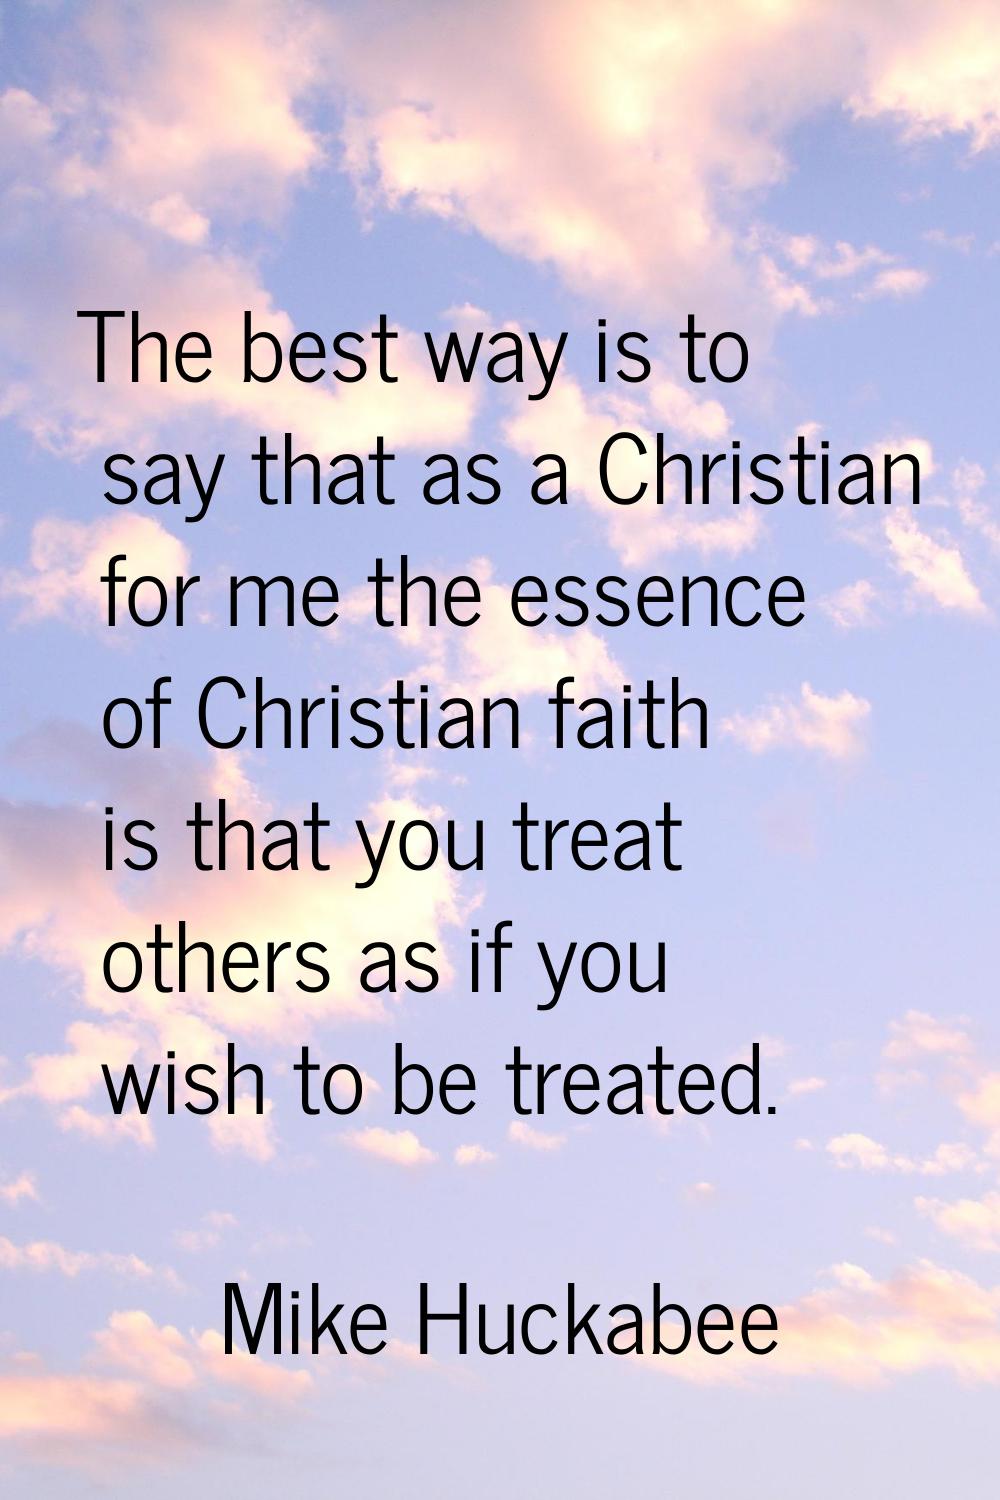 The best way is to say that as a Christian for me the essence of Christian faith is that you treat 